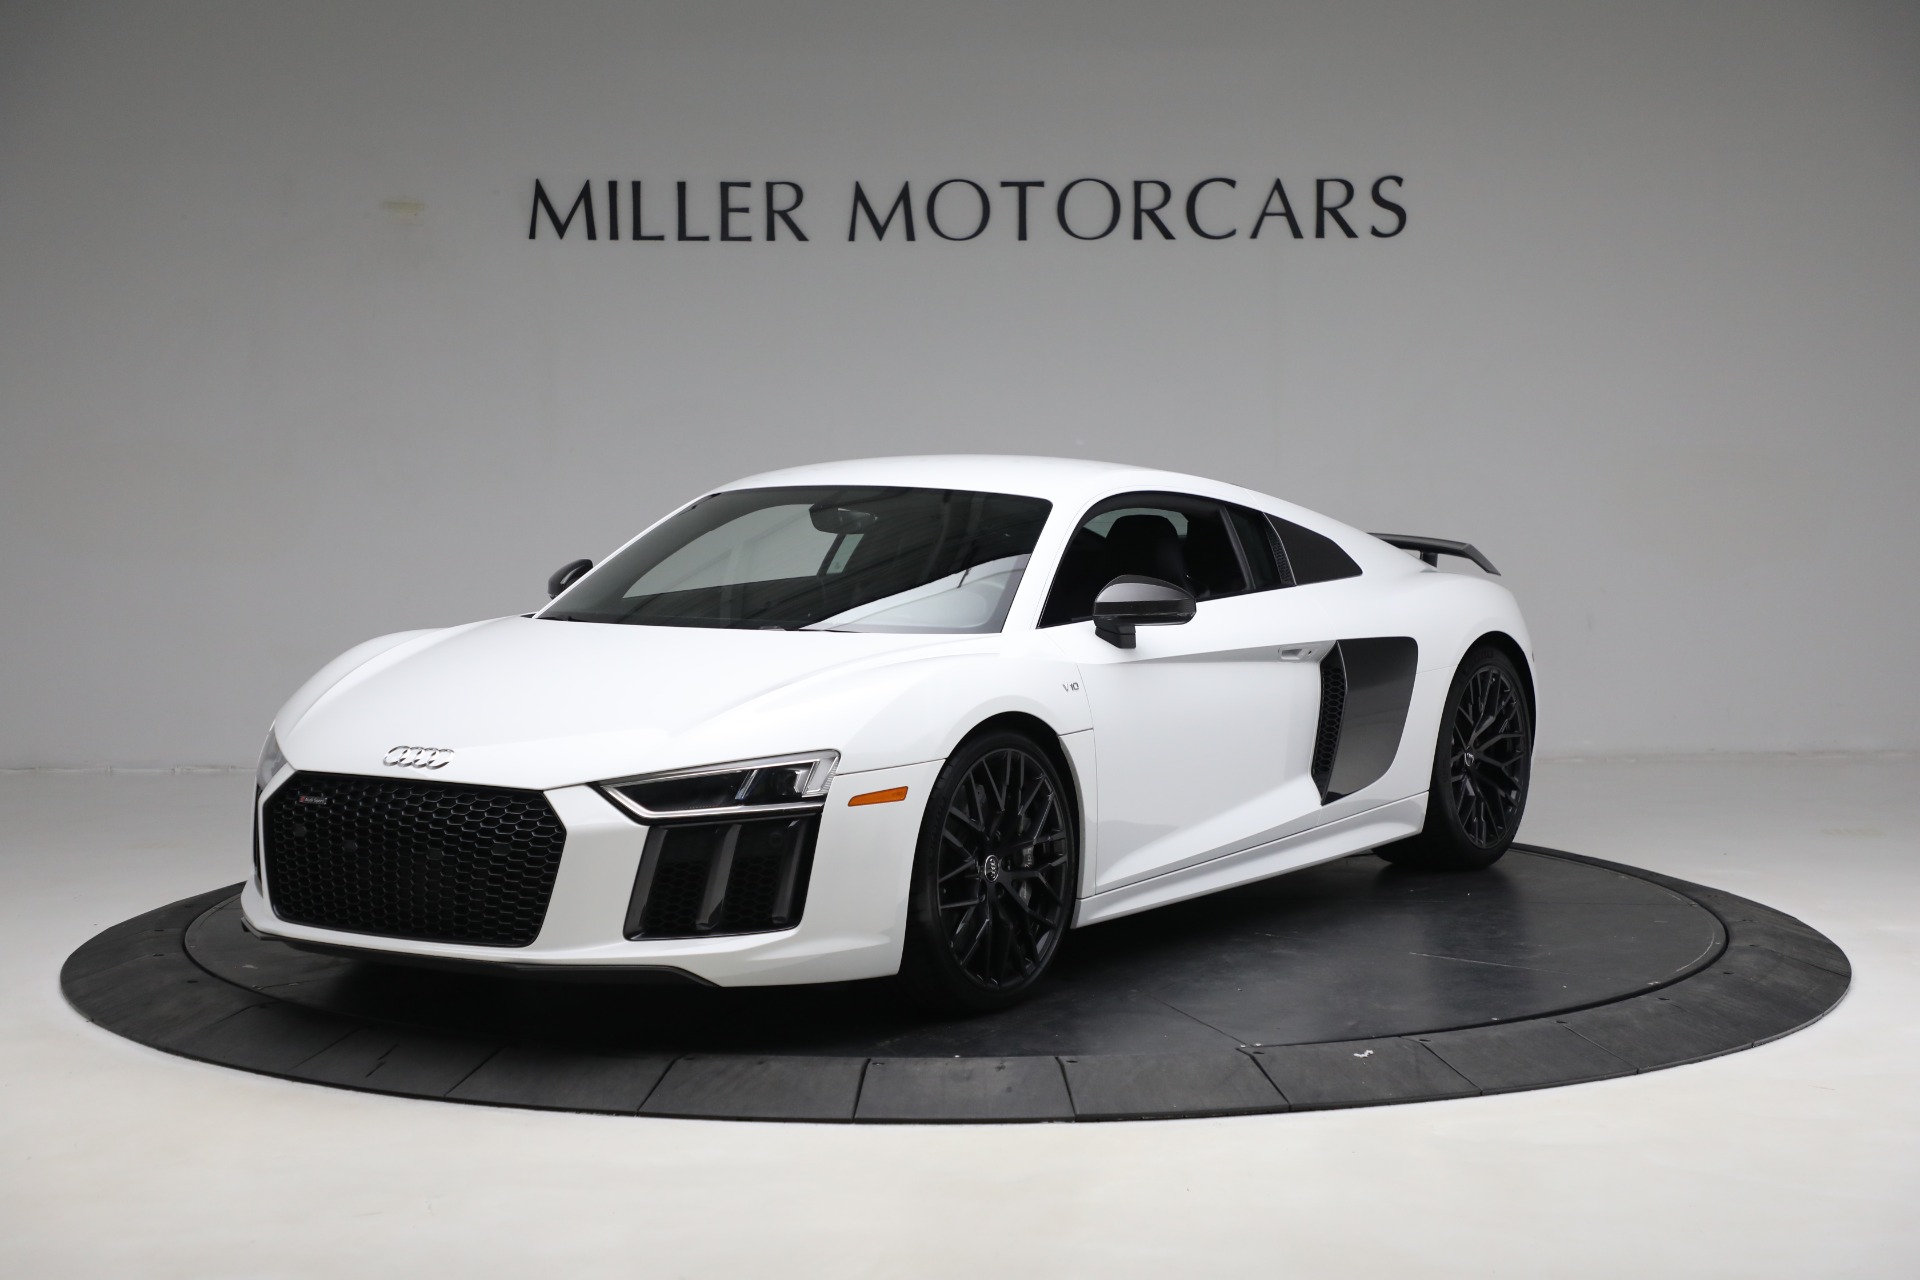 Used 2018 Audi R8 5.2 quattro V10 Plus for sale Sold at Pagani of Greenwich in Greenwich CT 06830 1